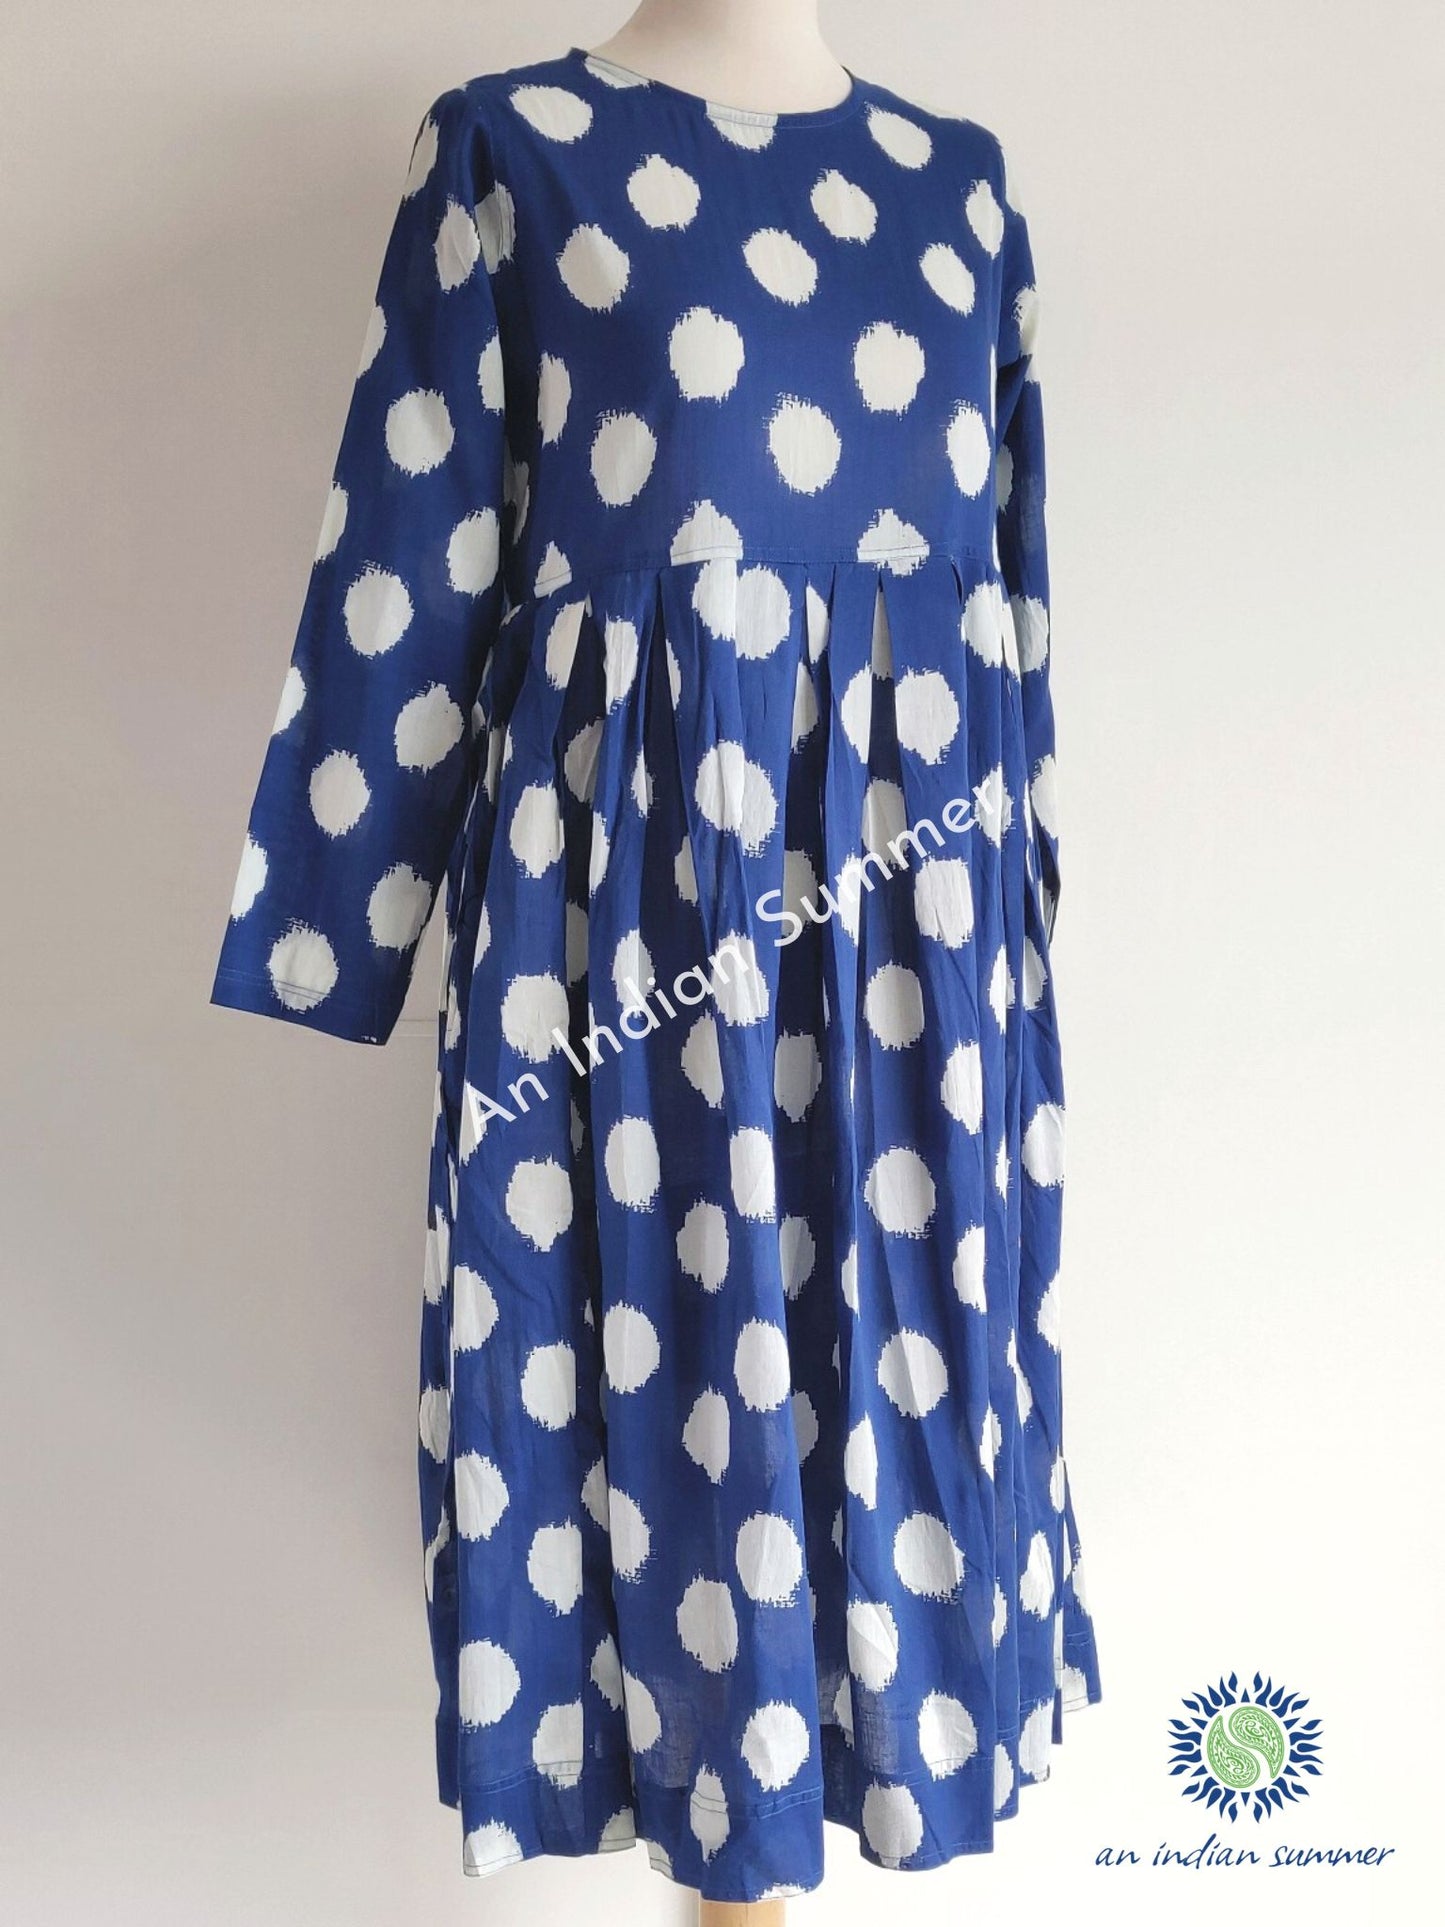 Ikat Polka Dot Dress Navy | Hand Block Printed | Soft Cotton Voile | An Indian Summer | Seasonless Timeless Sustainable Ethical Authentic Artisan Conscious Clothing Lifestyle Brand